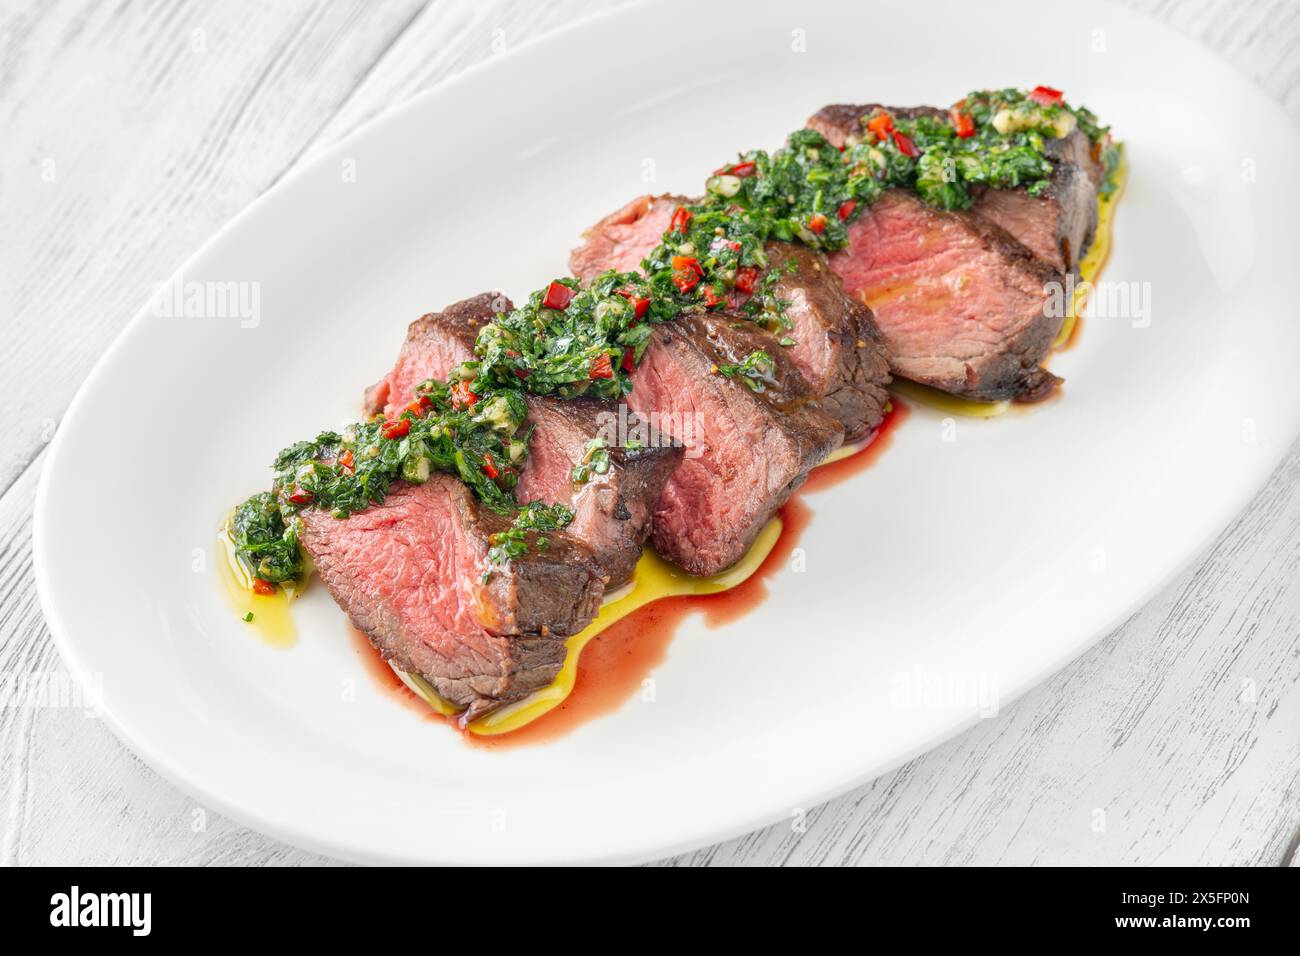 Portion of sliced strip steak with Chimichurri sauce Stock Photo